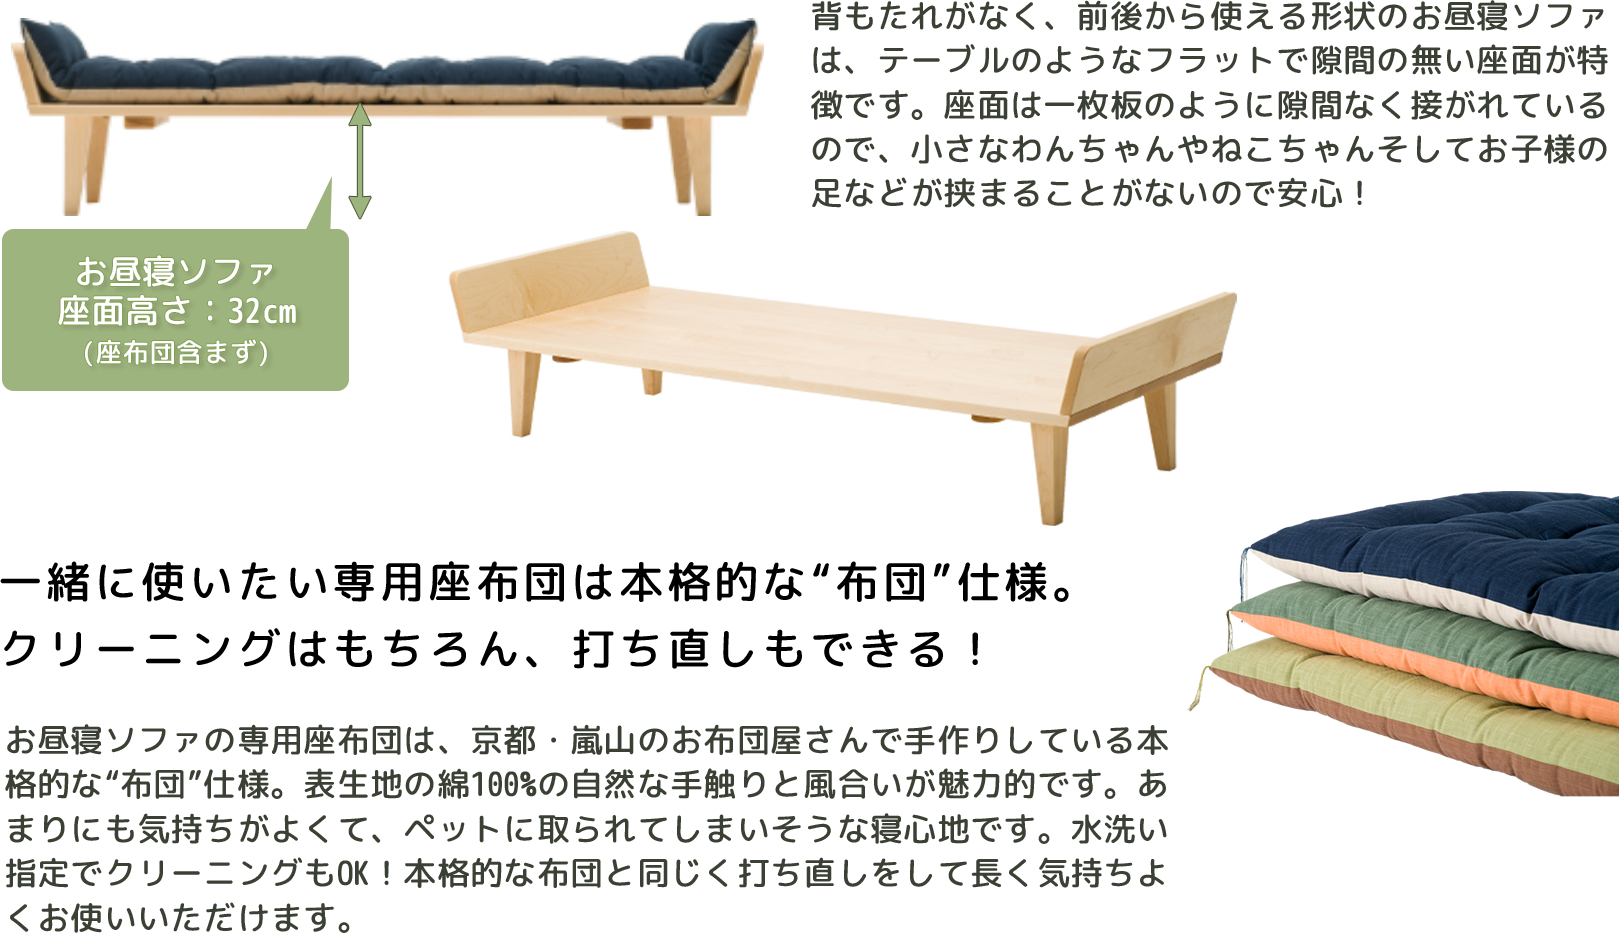 The nap sofa, which has no backrest and can be used from the front and back, features a flat seat with no gaps like a table. The seat is attached like a single board without any gaps, so you can rest assured that small dogs, cats, and children's feet will not get caught. The exclusive floor cushions for the nap sofa are authentic “futon” specifications handmade by a futon shop in Arashiyama, Kyoto. The natural touch and texture of the 100% cotton outer fabric is attractive. It's so comfortable that it feels like it's going to be taken by a pet. Cleaning is also OK by washing with water! You can use it comfortably for a long time by remaking it like a full-fledged futon.